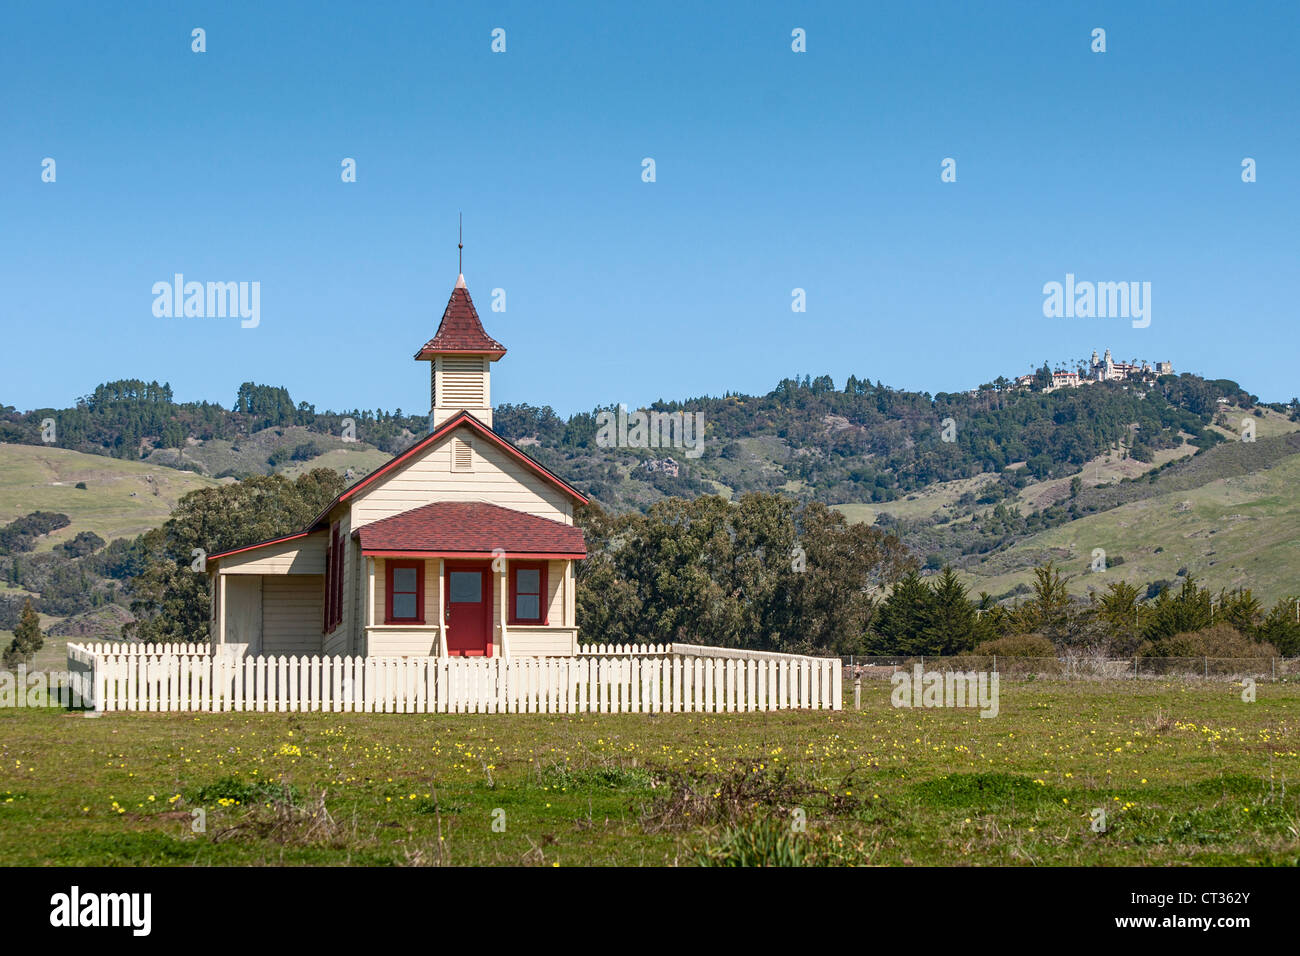 The Old San Simeon Schoolhouse in California with the famous Hearst Castle in the background. Stock Photo